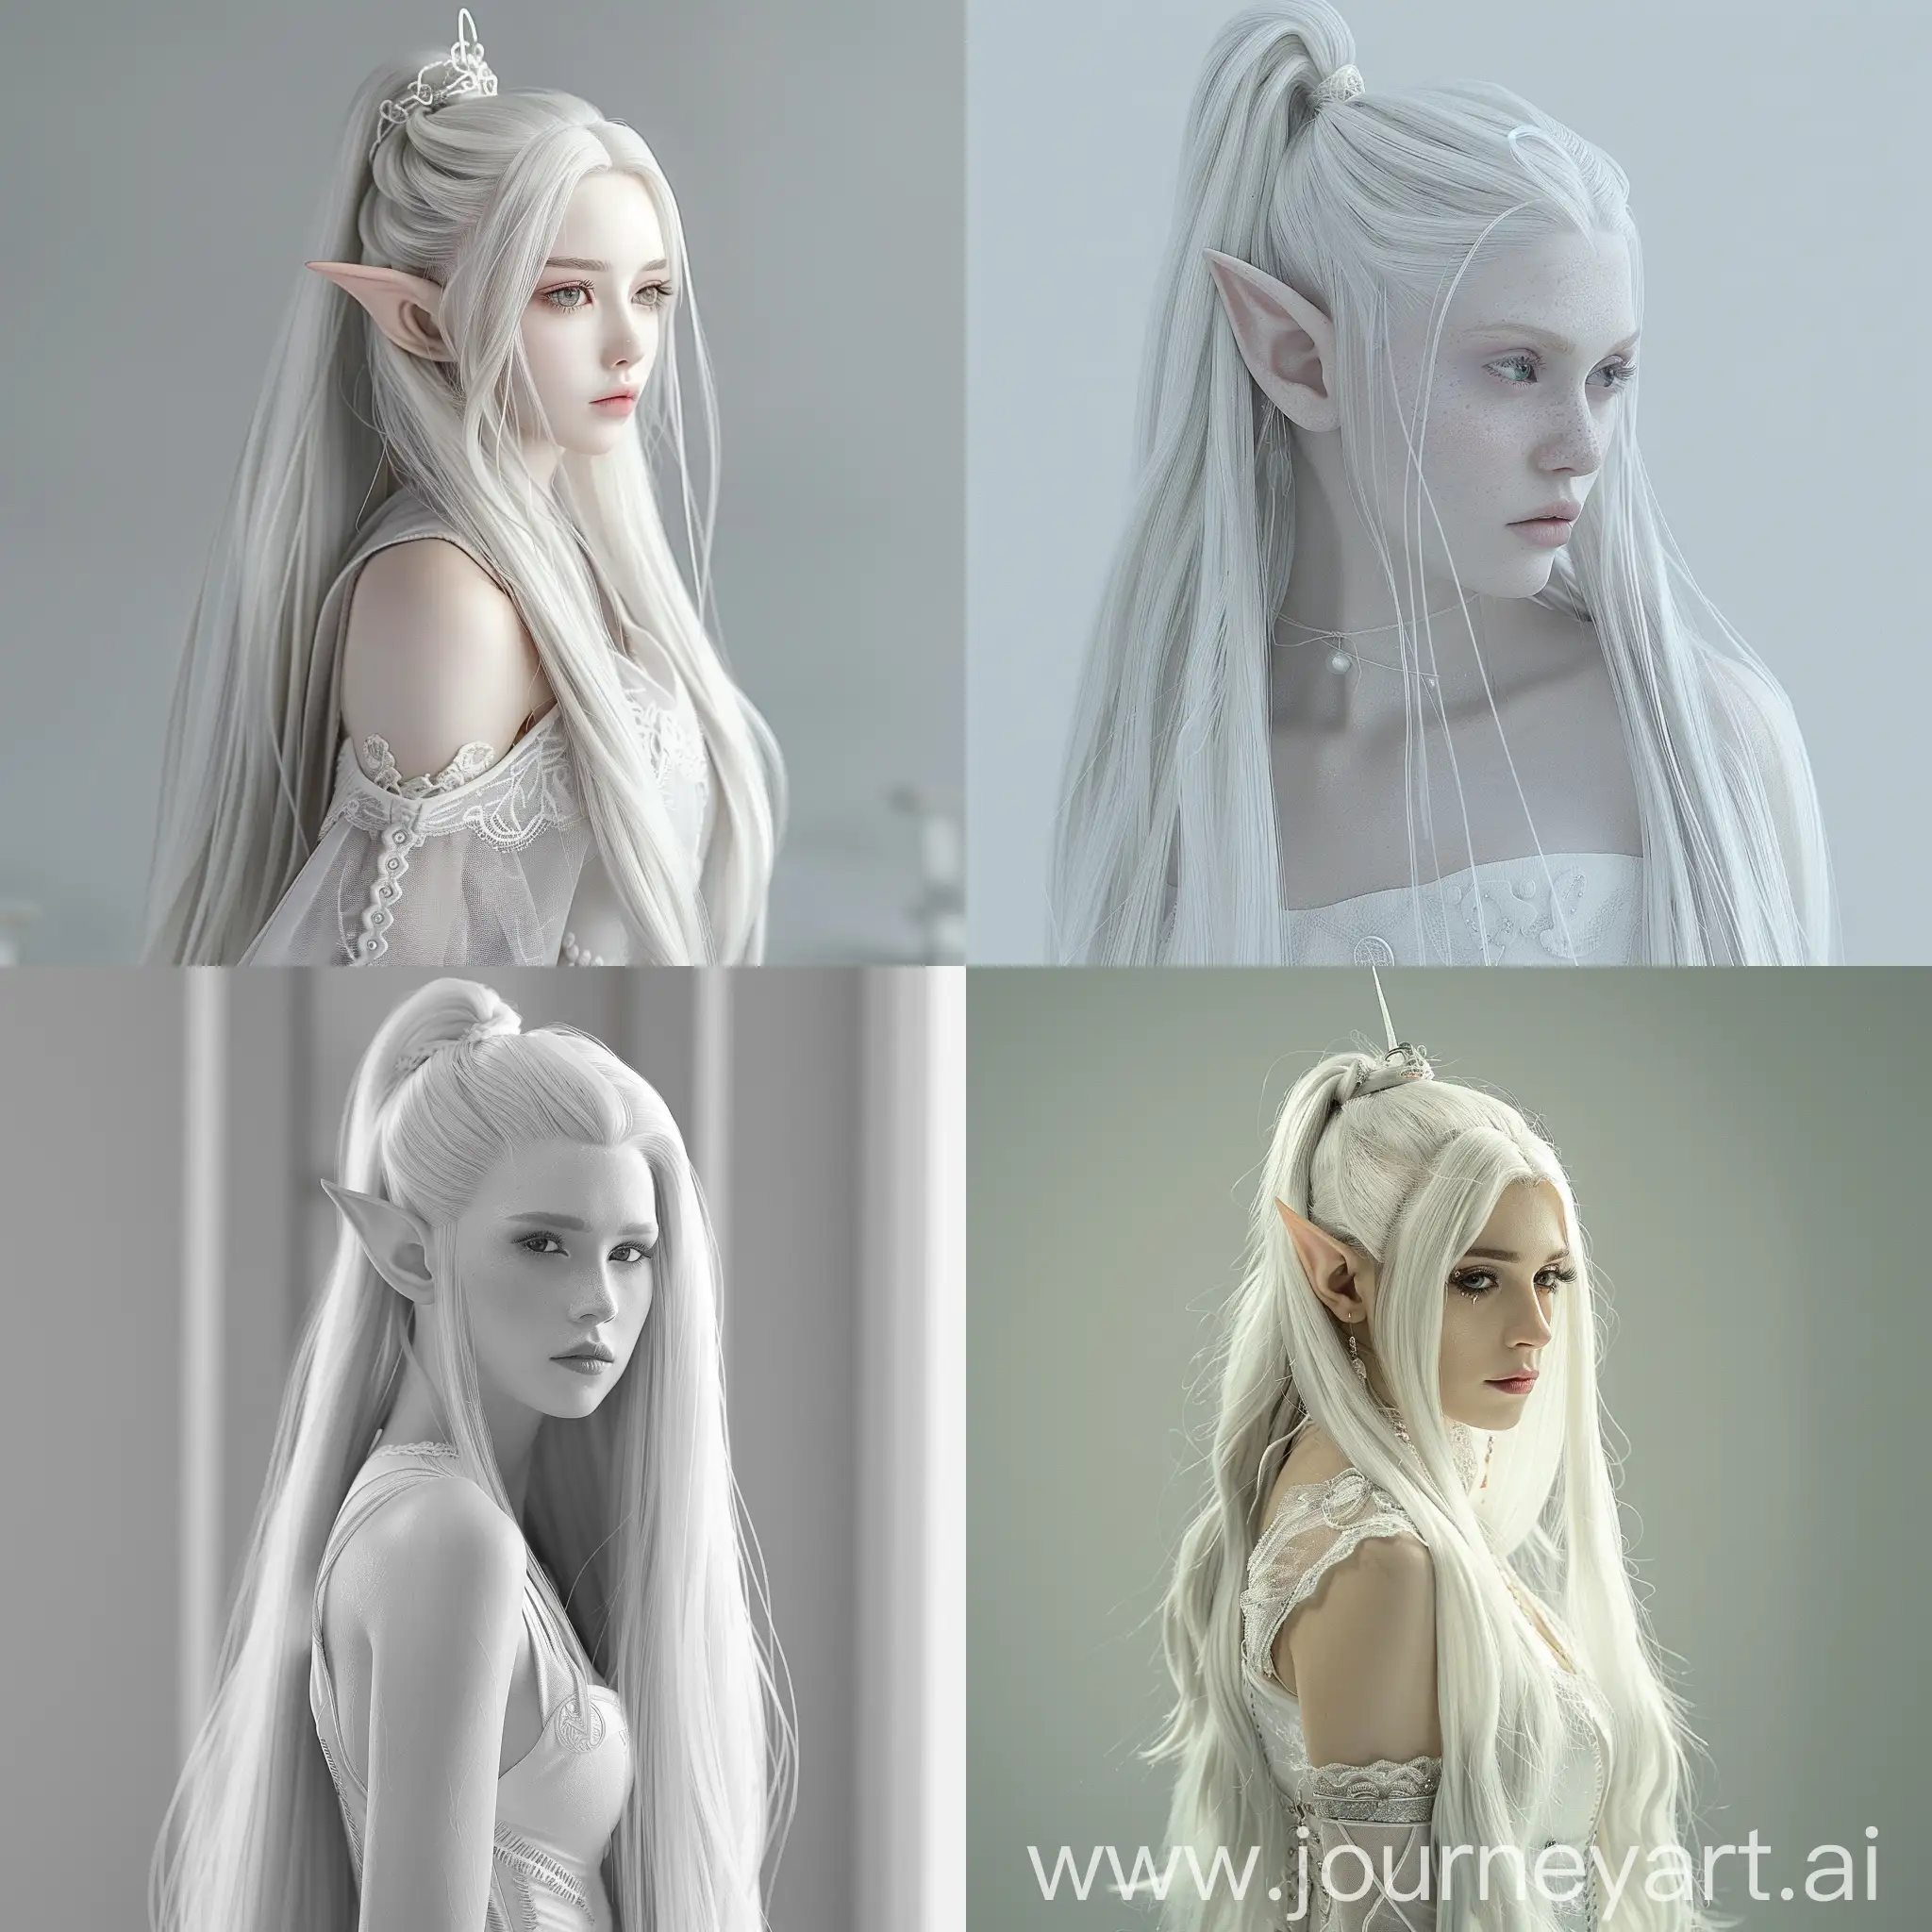 Elegant-WhiteHaired-Elf-with-Delicate-Makeup-and-Graceful-Curves